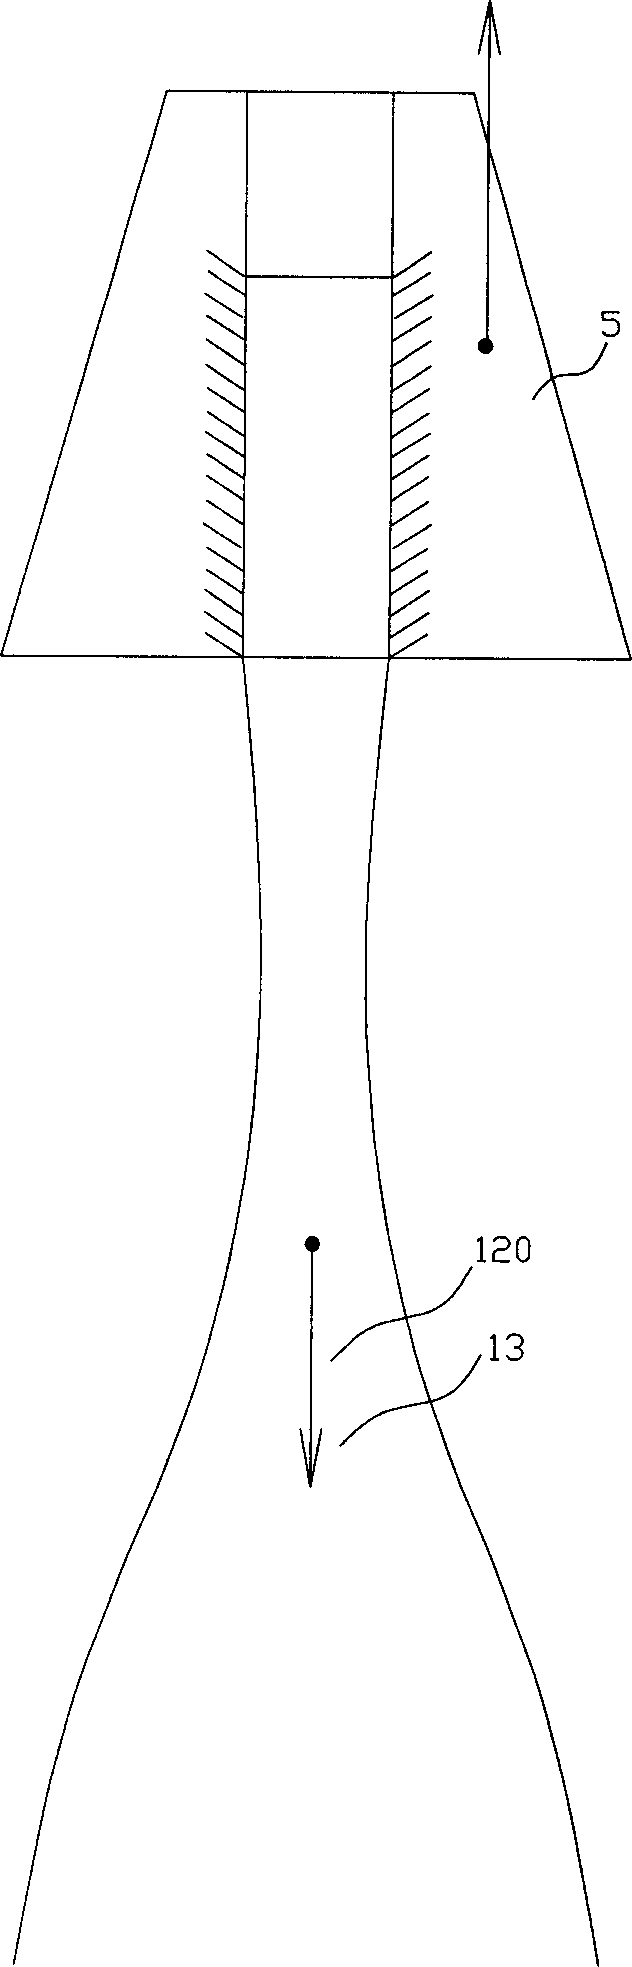 Reverse squeezing fixing method and device for ligament